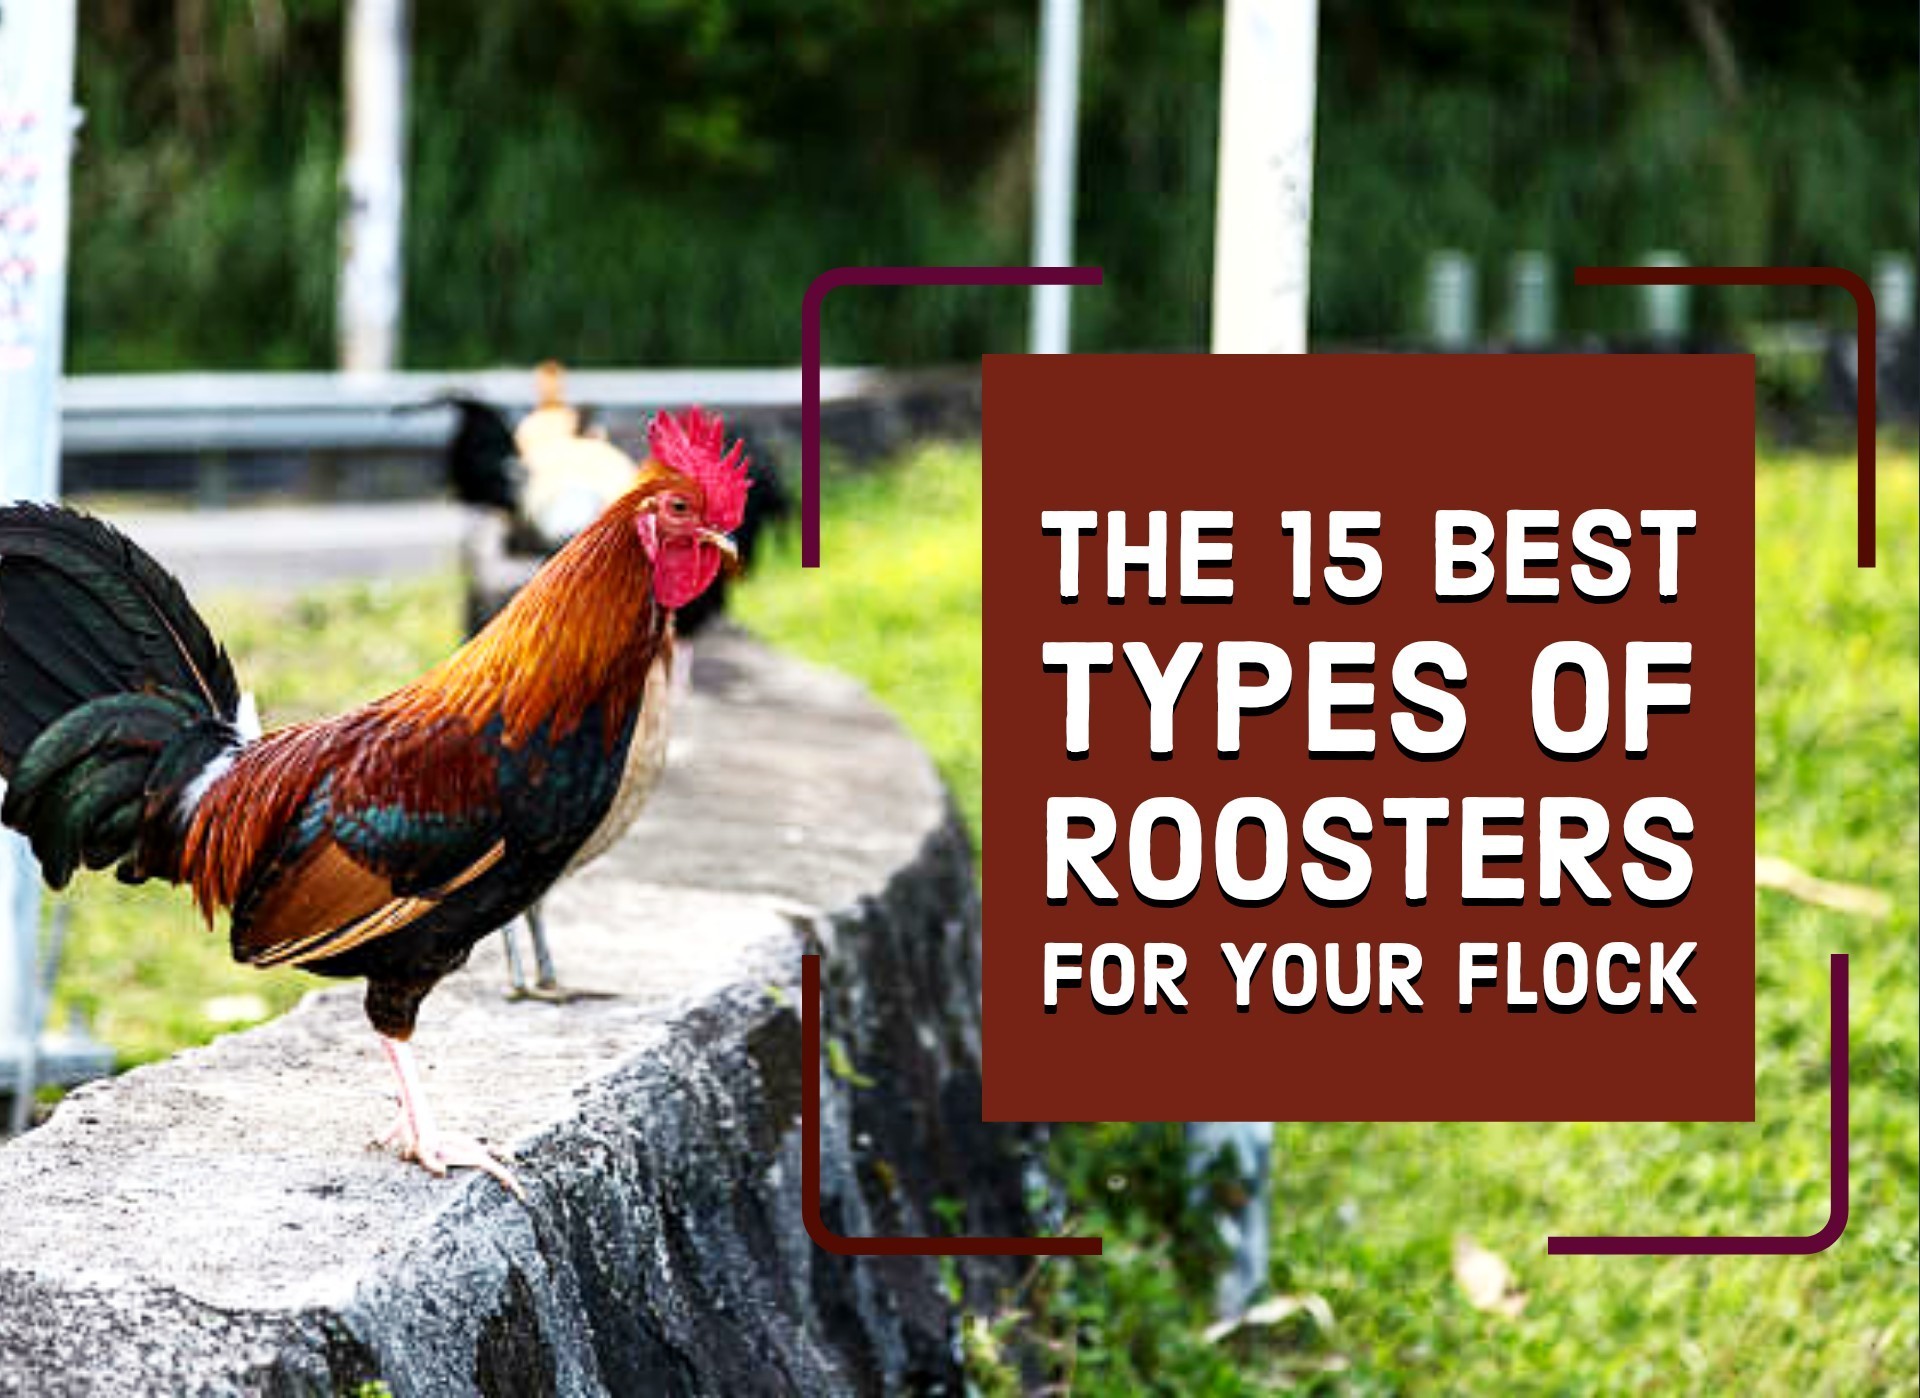 The 15 Best Types of Roosters For Your Flock